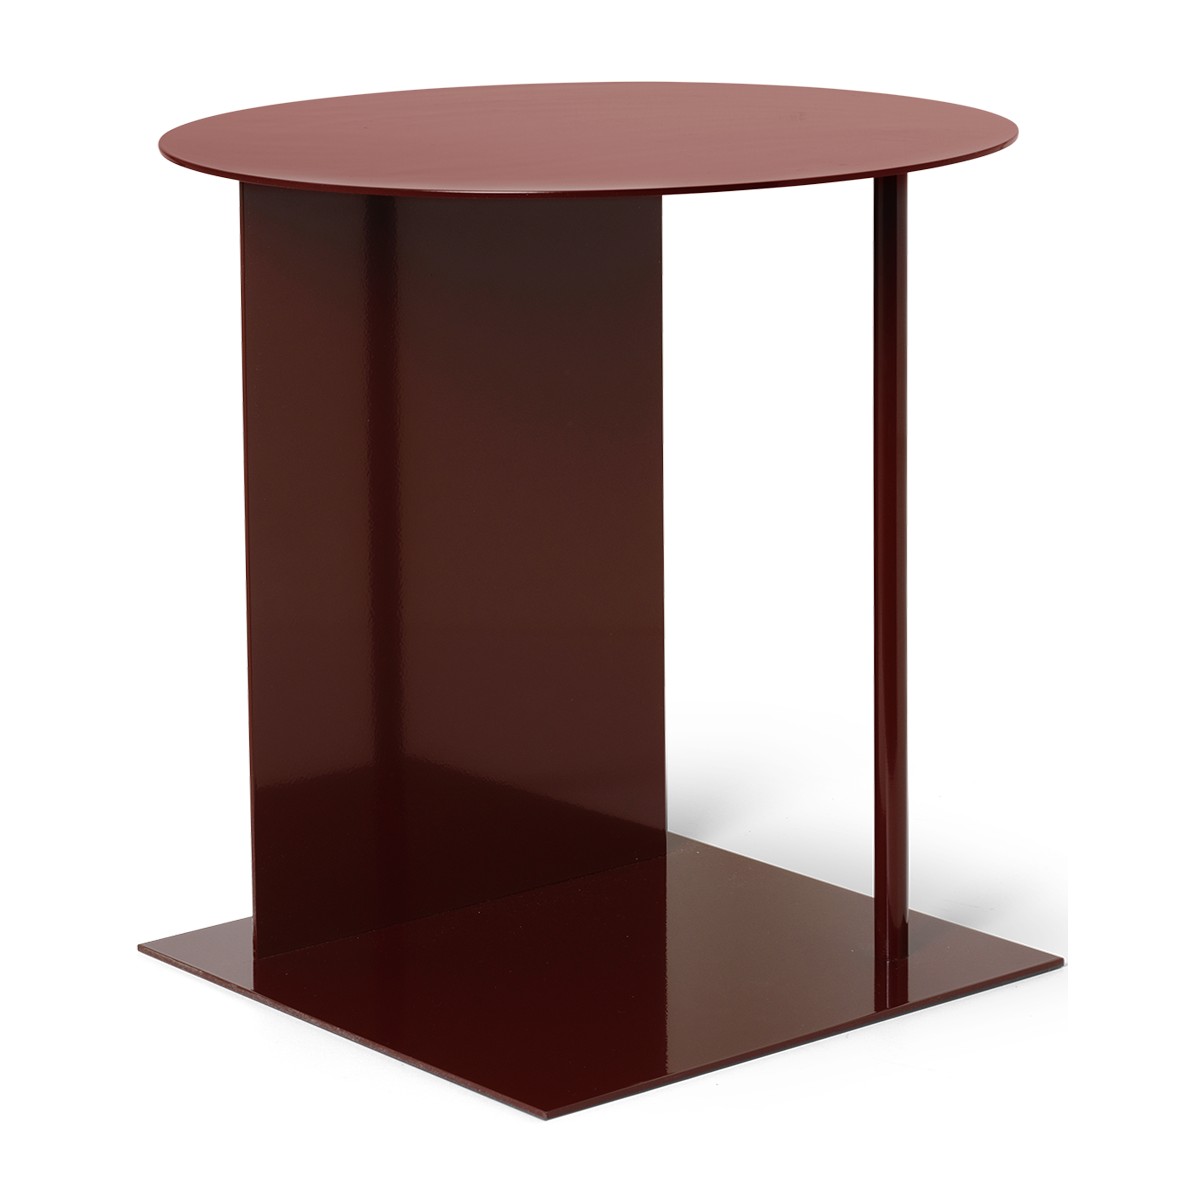 Place side table - glossy red brown